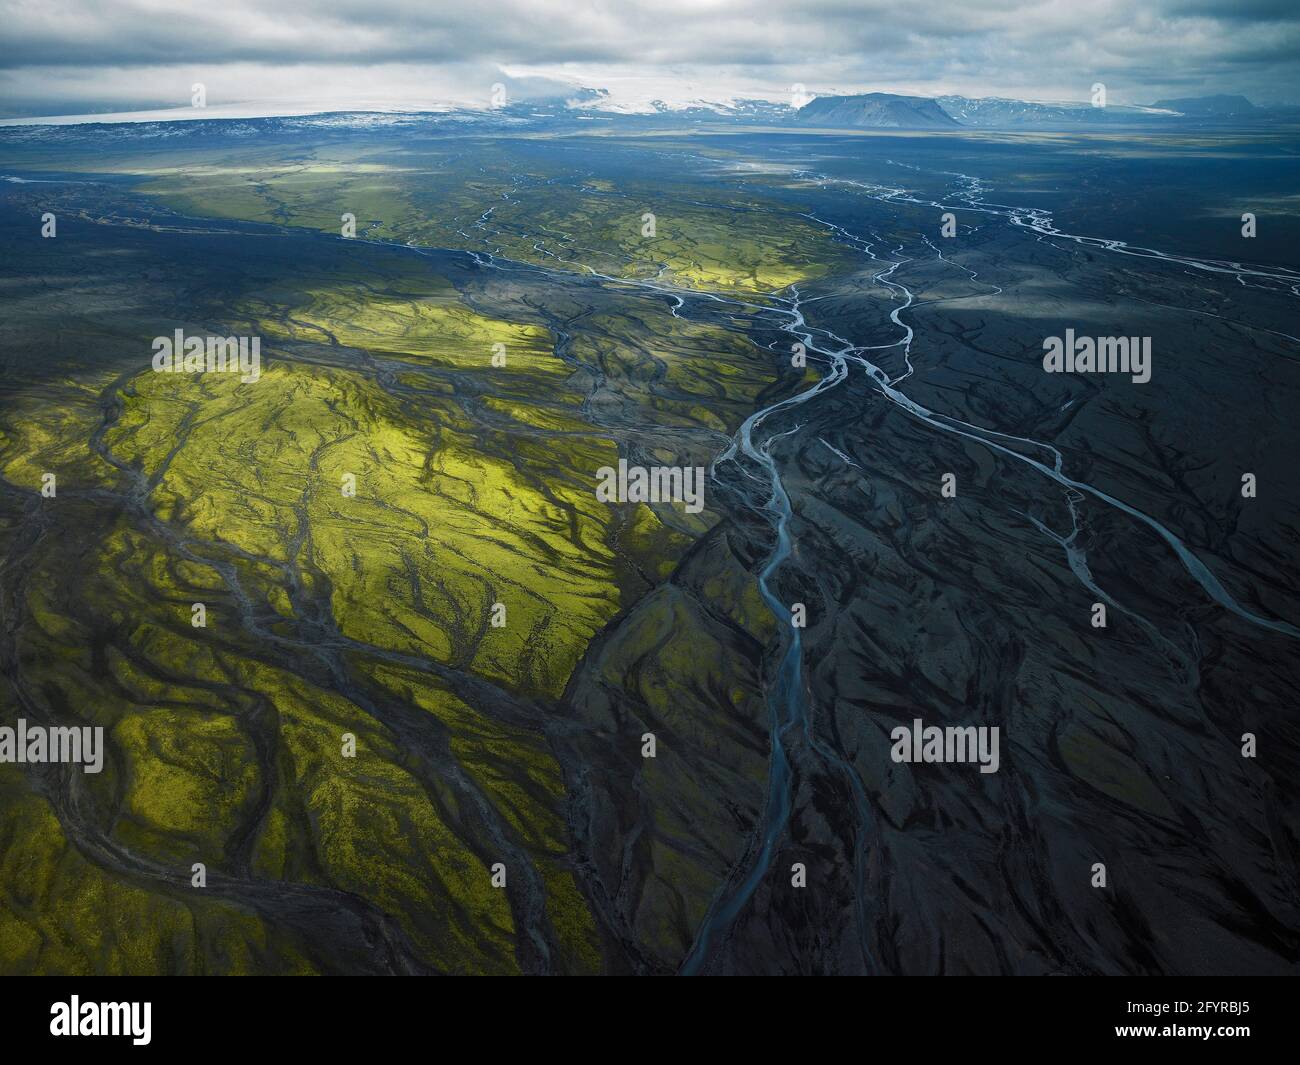 Aerial view of meandering river system on the Icelandic highlands Stock Photo